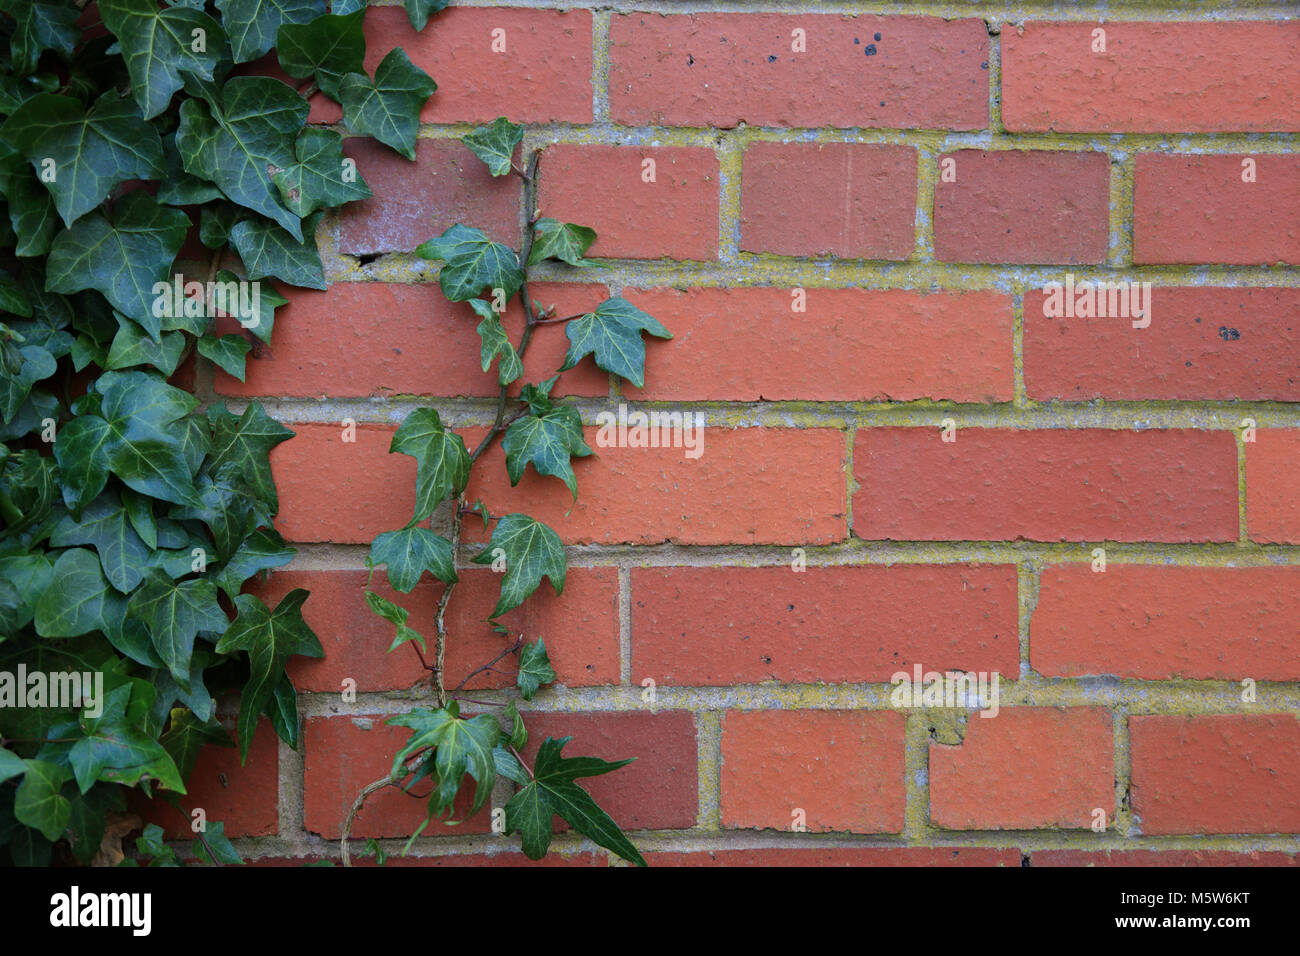 Red brick wall with Ivy growing on it Stock Photo - Alamy